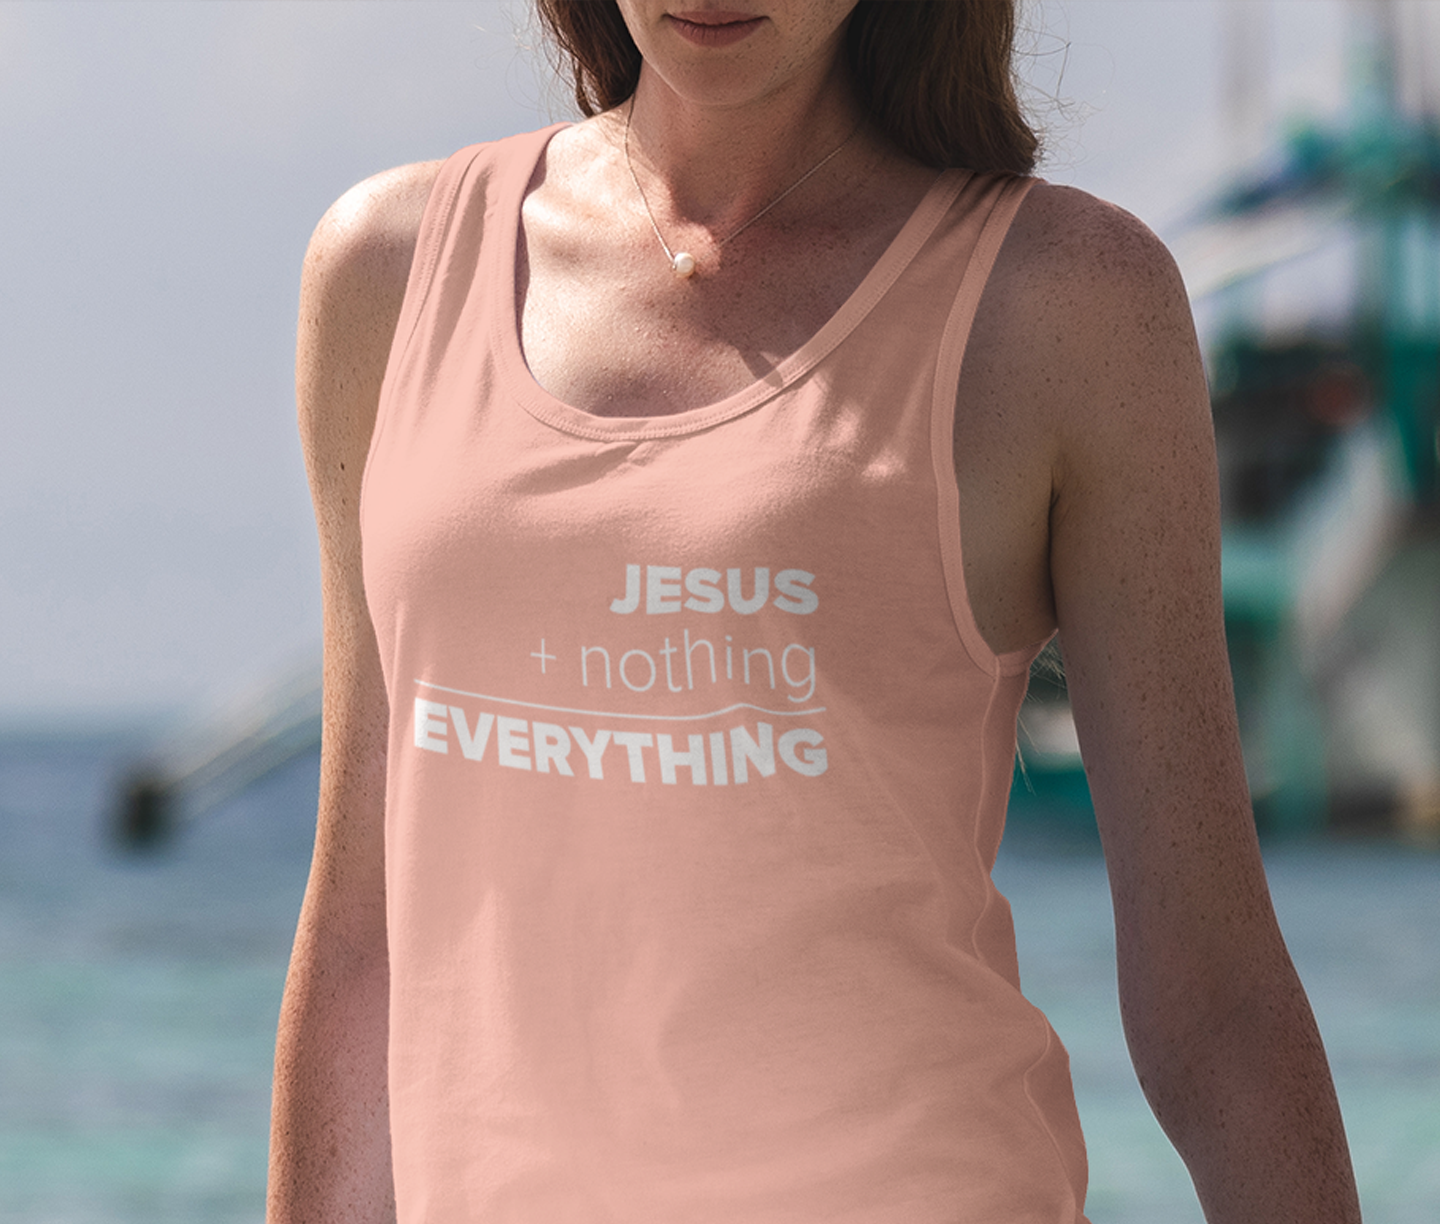 JESUS EQUALS EVERYTHING TANK FRONT - CHRISTIAN CLOTHING